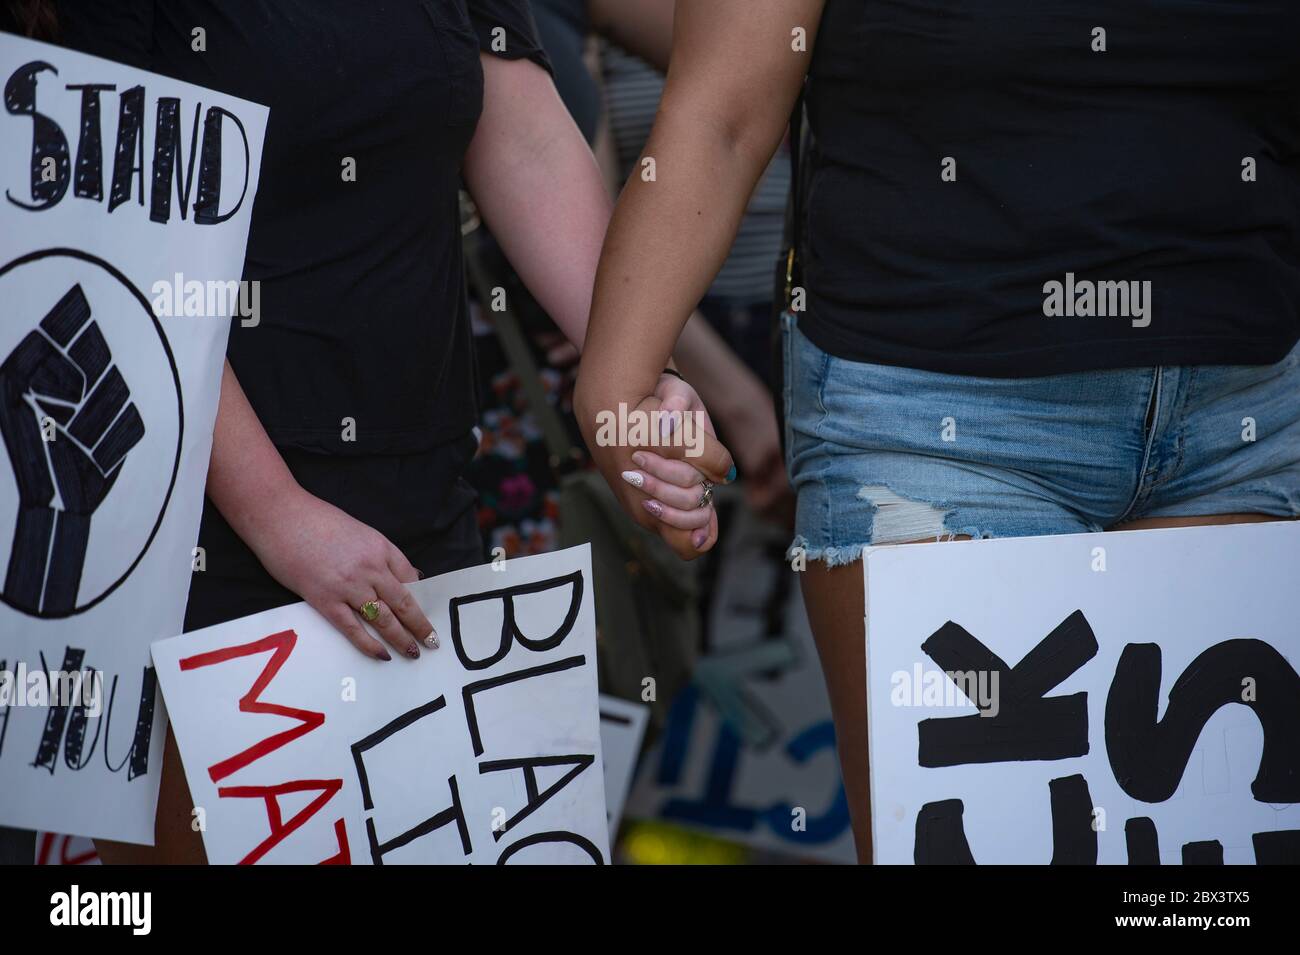 Manhattan, Kansas, USA. 3rd June, 2020. ANNIE MCBEE, left, holds during an emotional speech by Taneika Nicole during a peaceful protest in City Park on Wednesday. The protest was organized in response to the death of George Floyd by Minneapolis police last week. Credit: Luke Townsend/ZUMA Wire/Alamy Live News Stock Photo